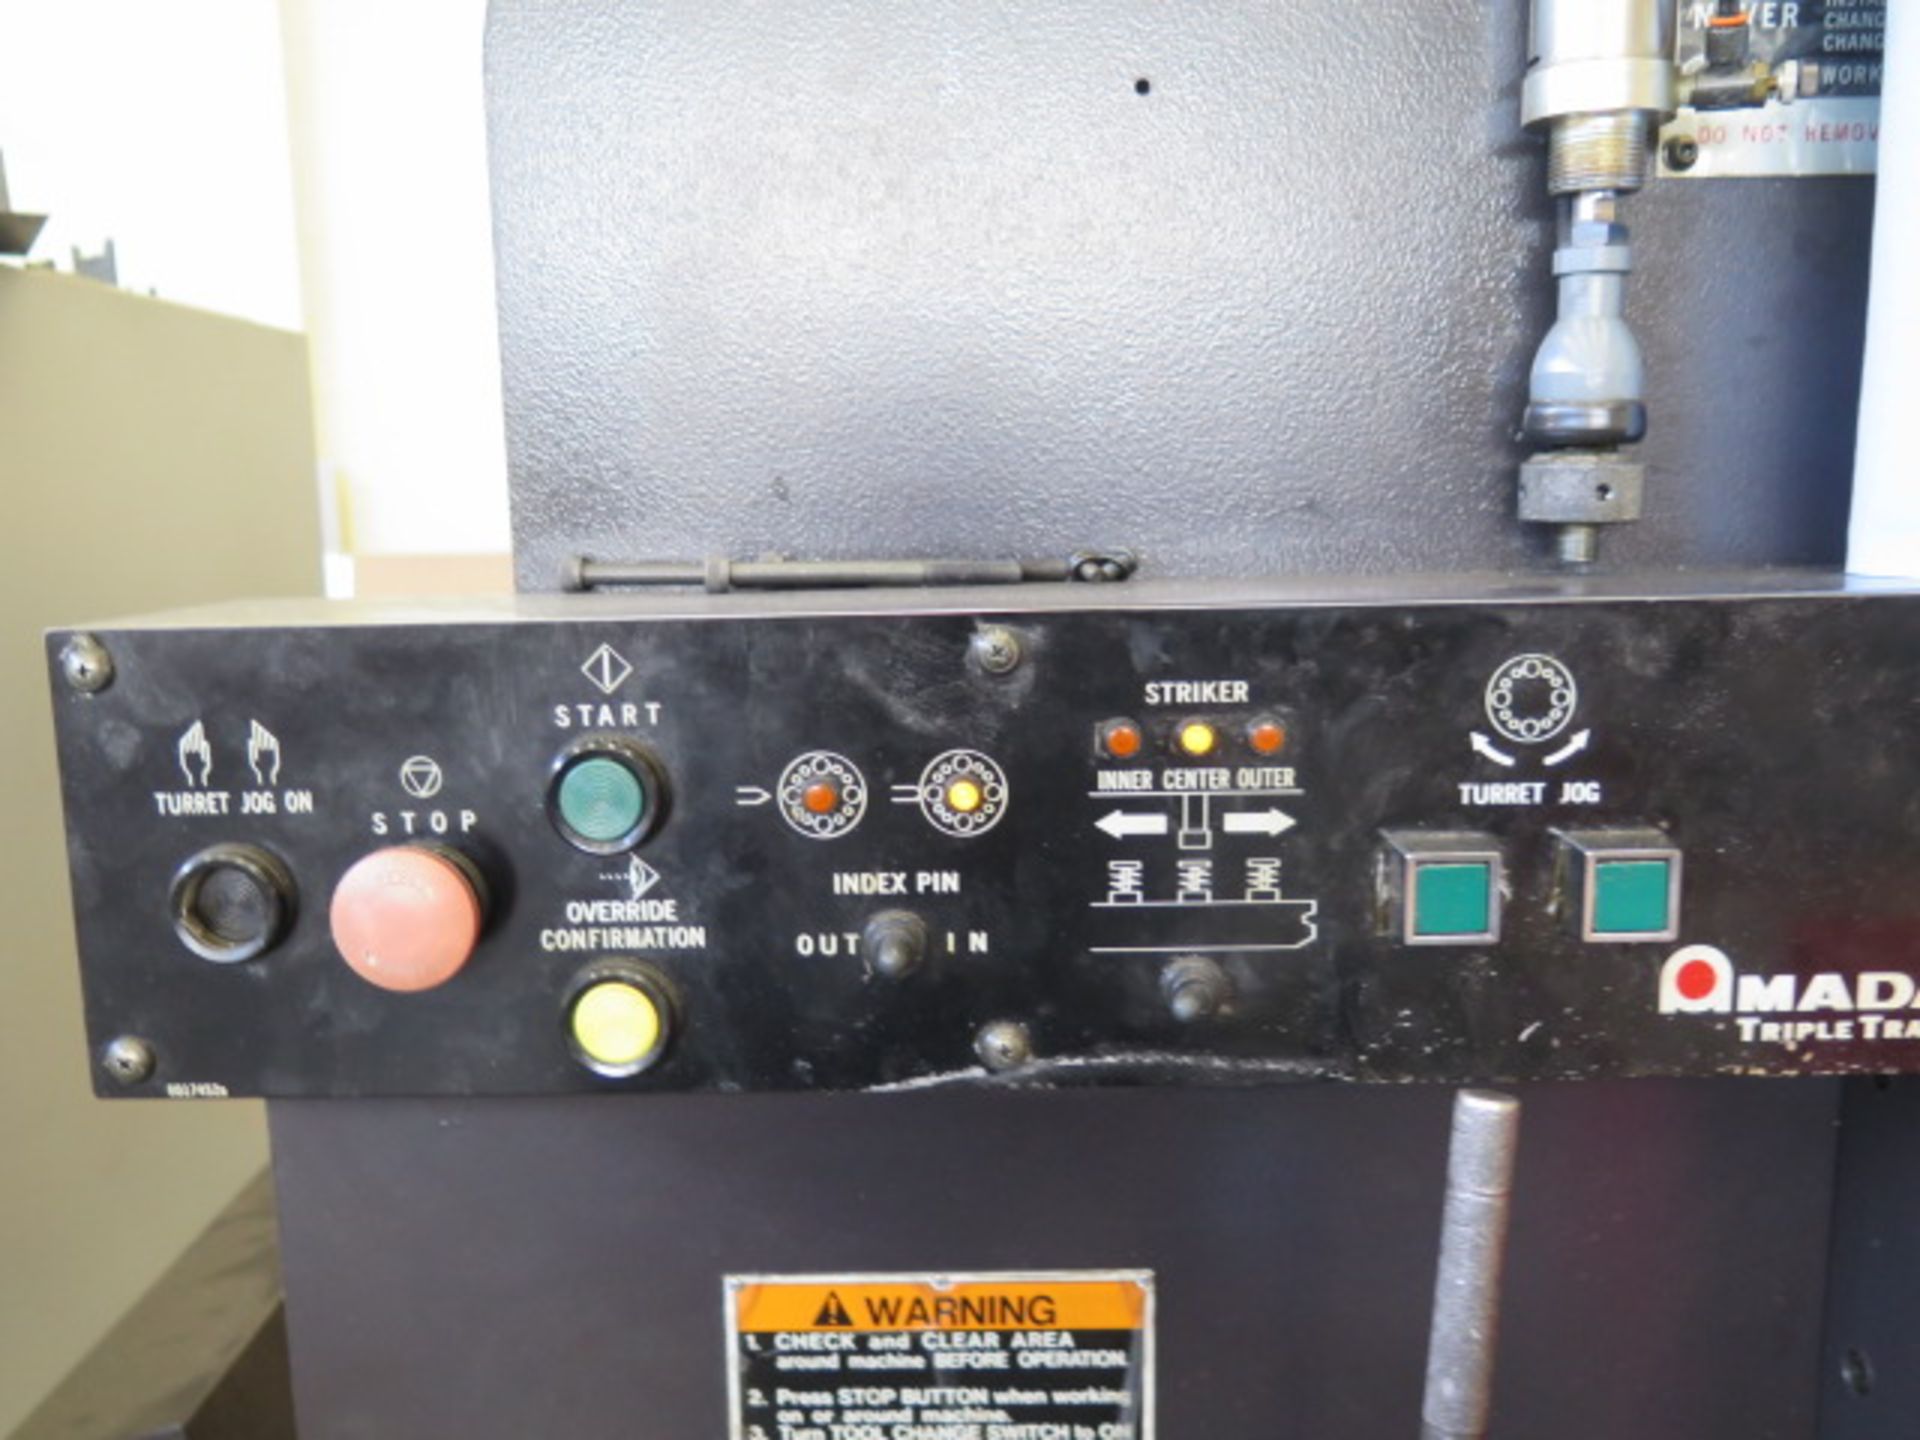 Amada VIPROS 357 30-Ton CNC Turret Punch Cell s/n 35710664 w/ 04P-C Controls, 58-Station, SOLD AS IS - Image 9 of 37